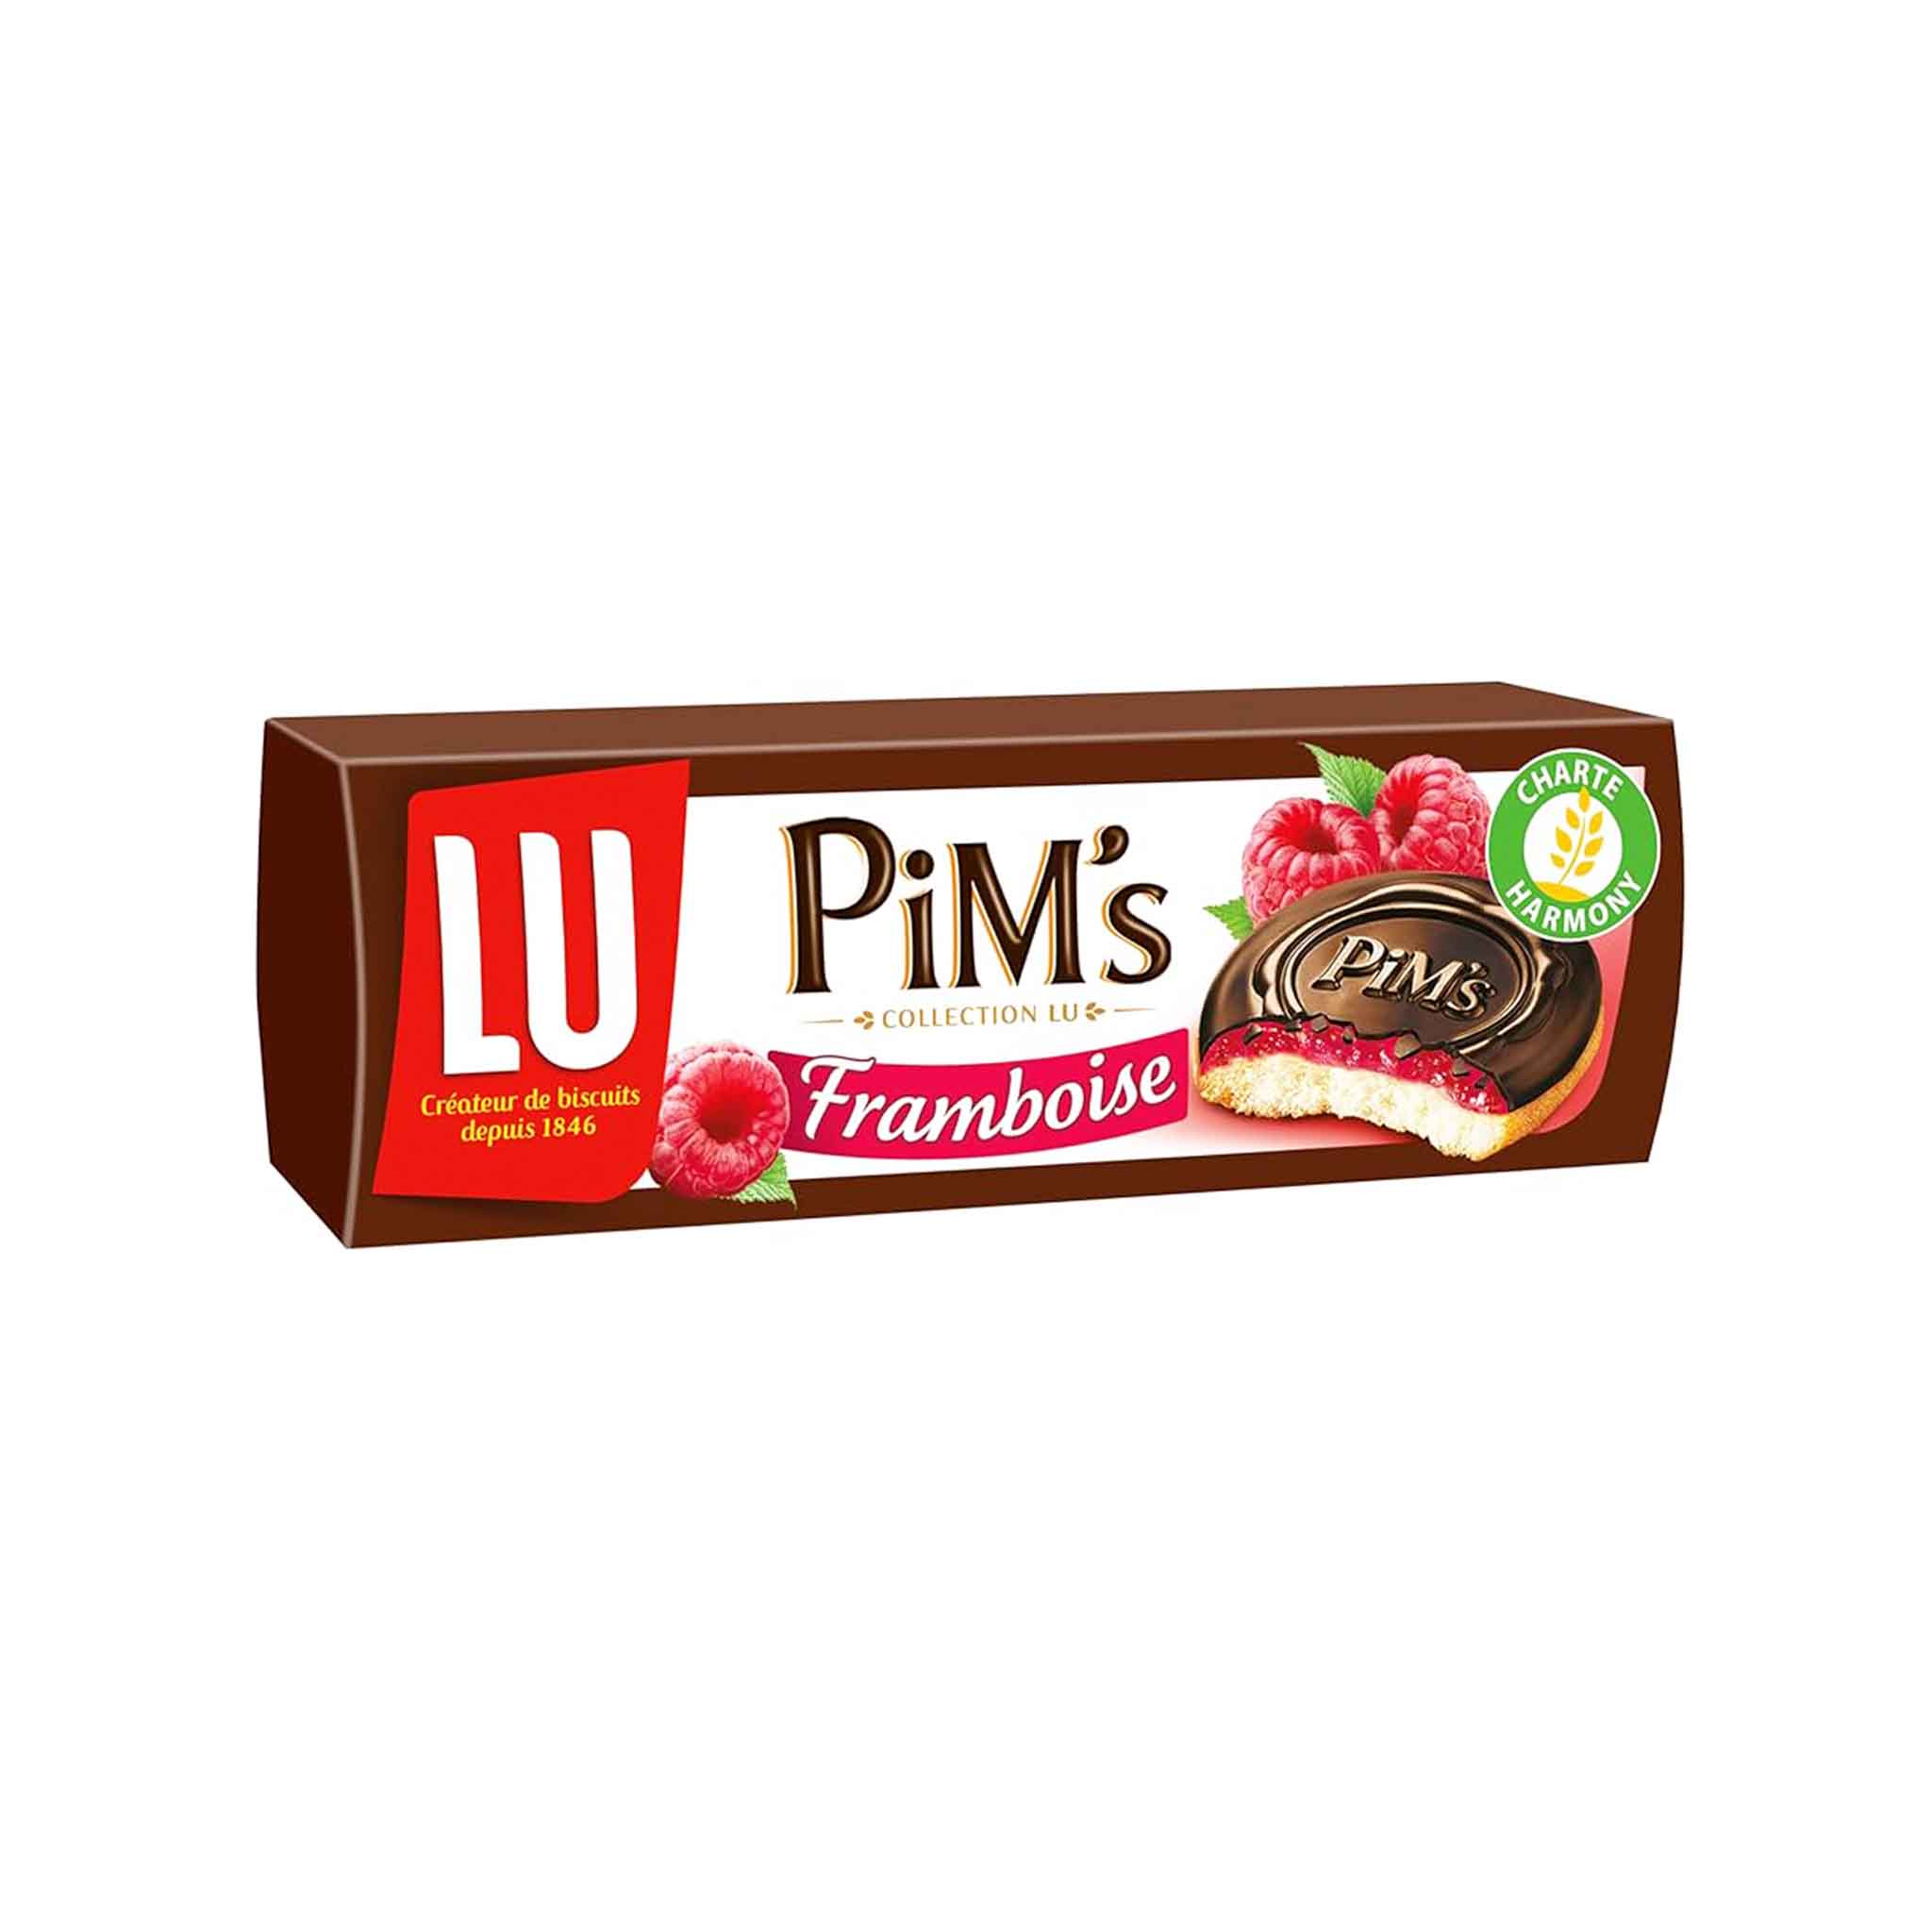 LU PIMS FRAMBOISE BISCUITS RASPBERRY FILLED COOKIES 150g